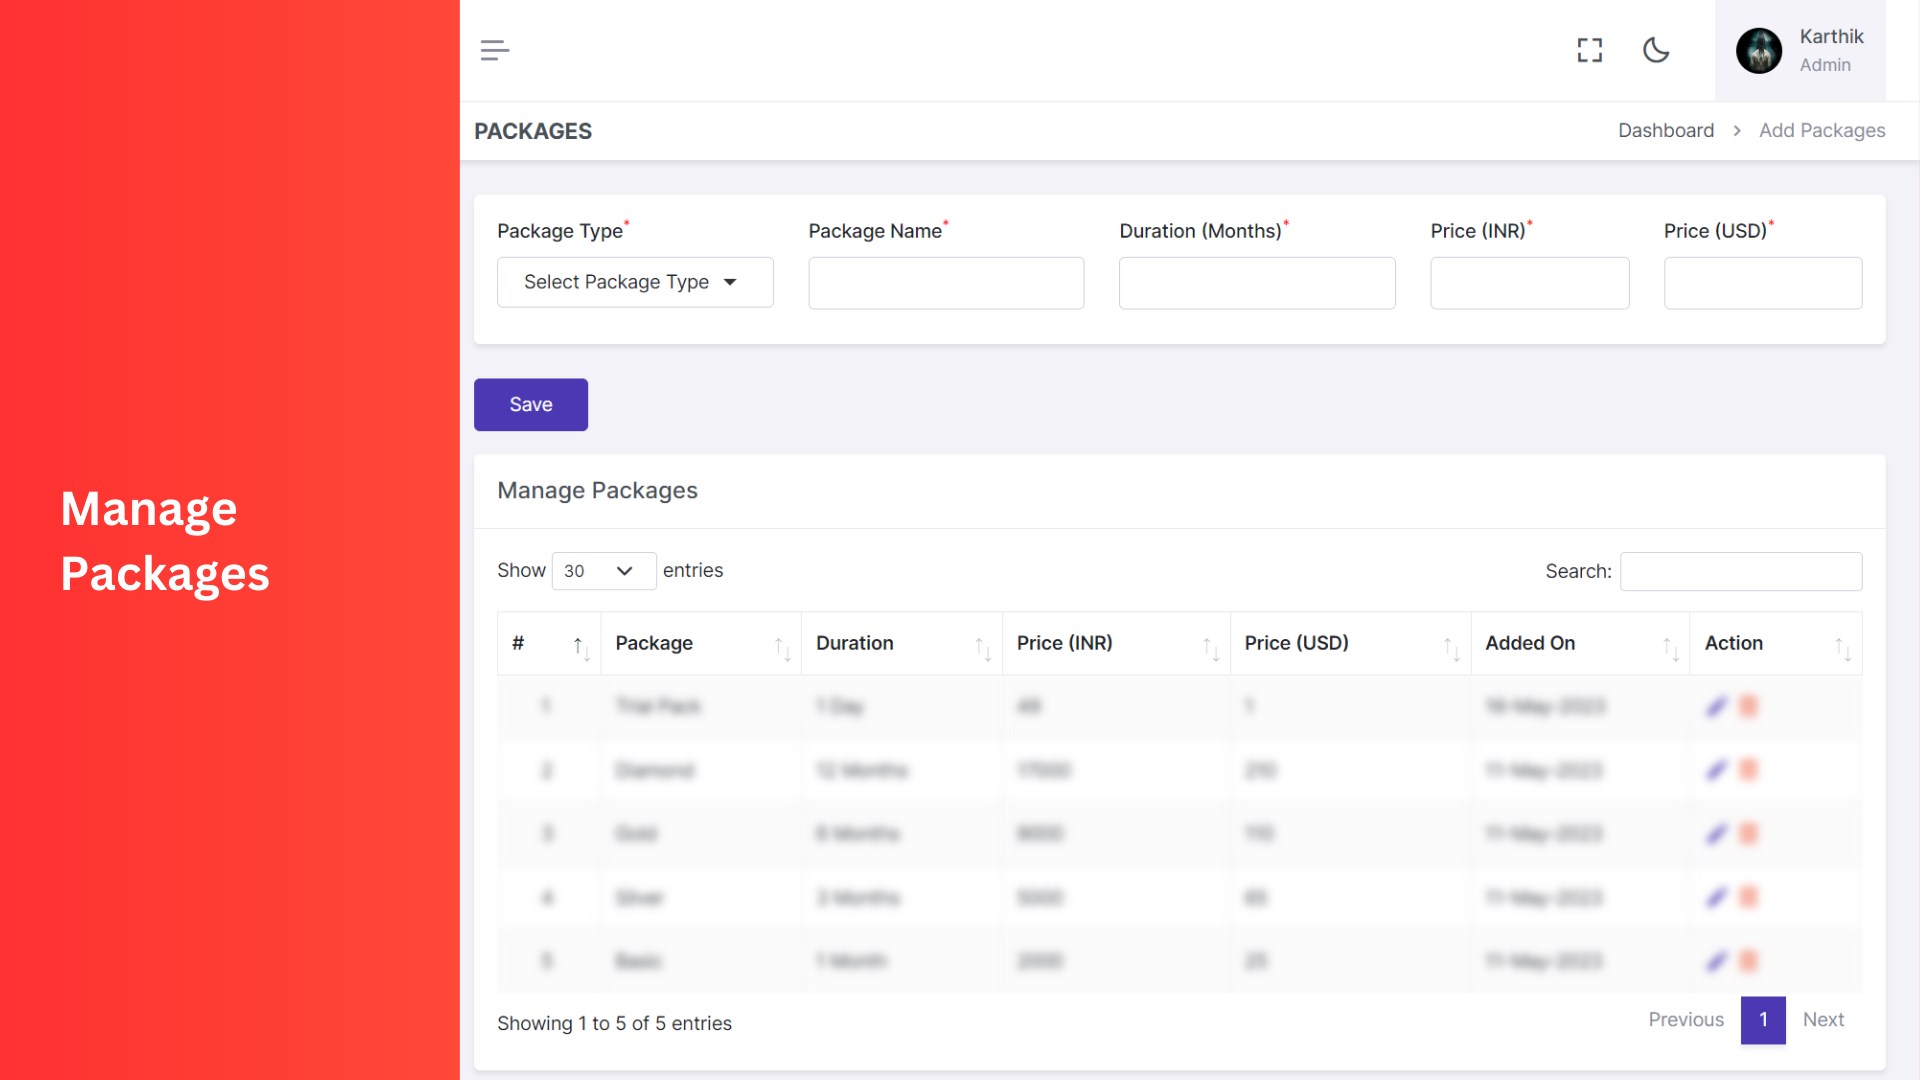 Feature to manage packages with customizable pricing options.